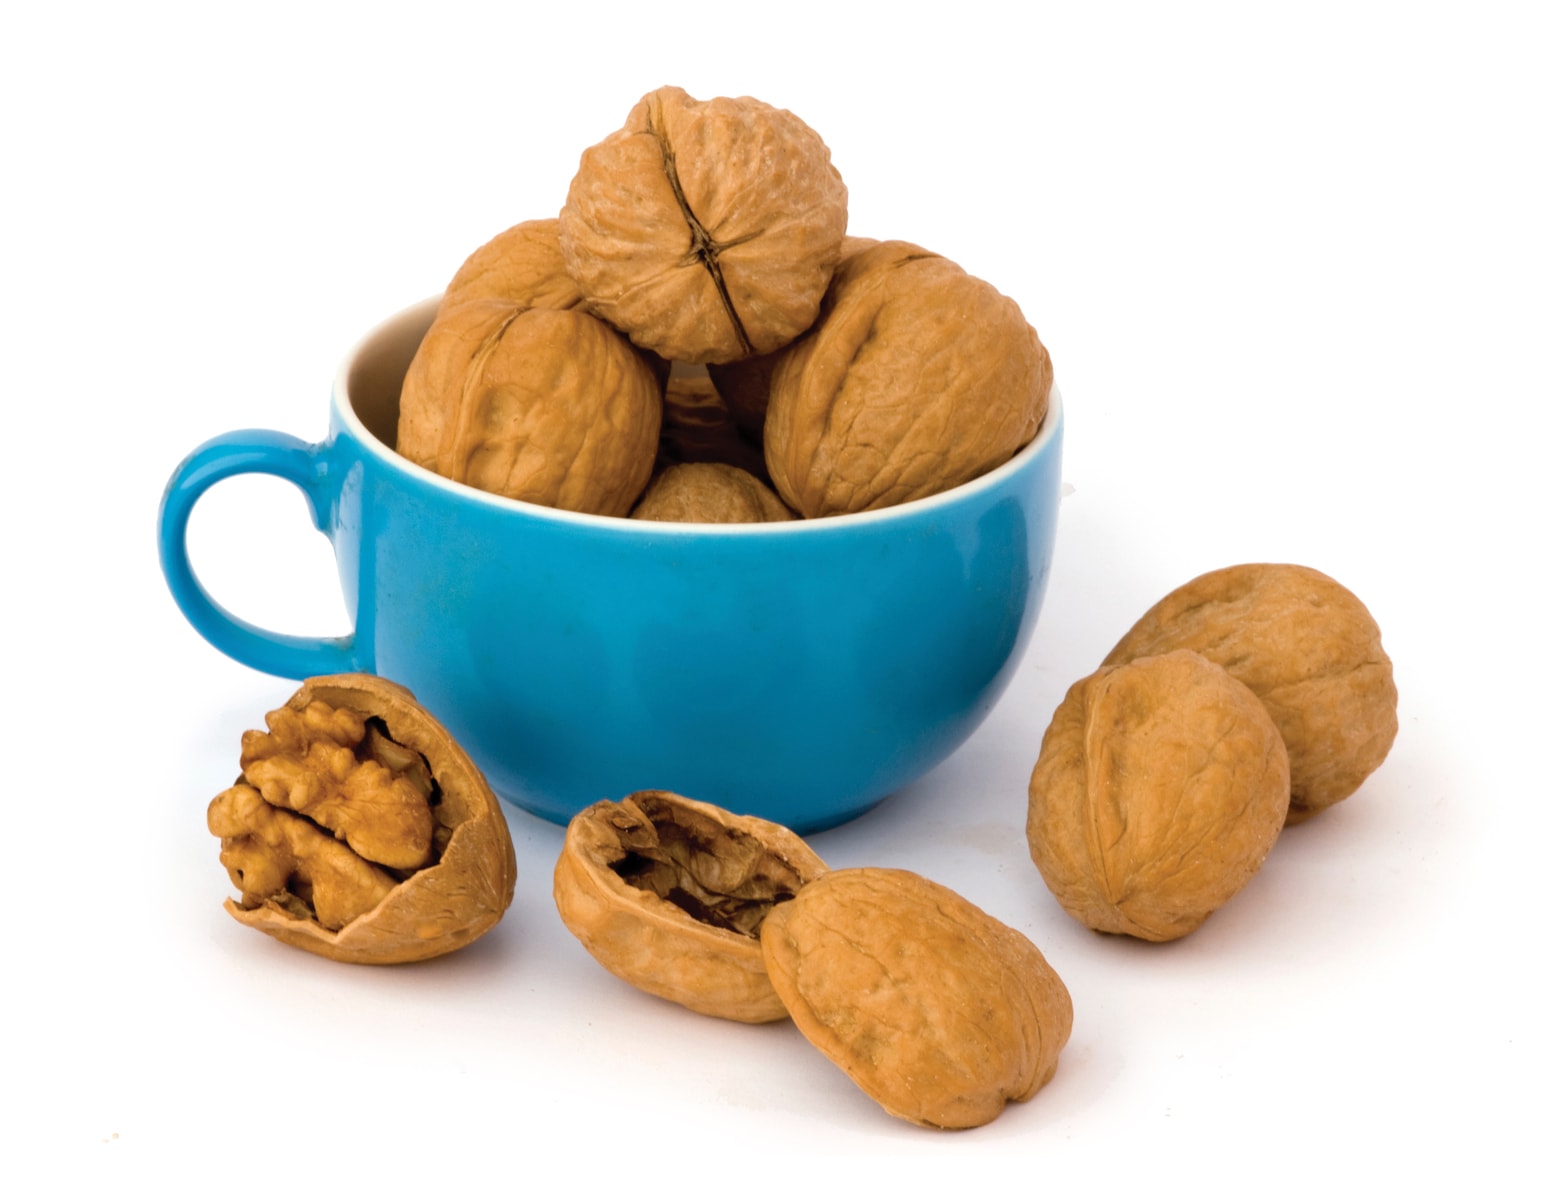 Guide to nuts - Healthy Food Guide